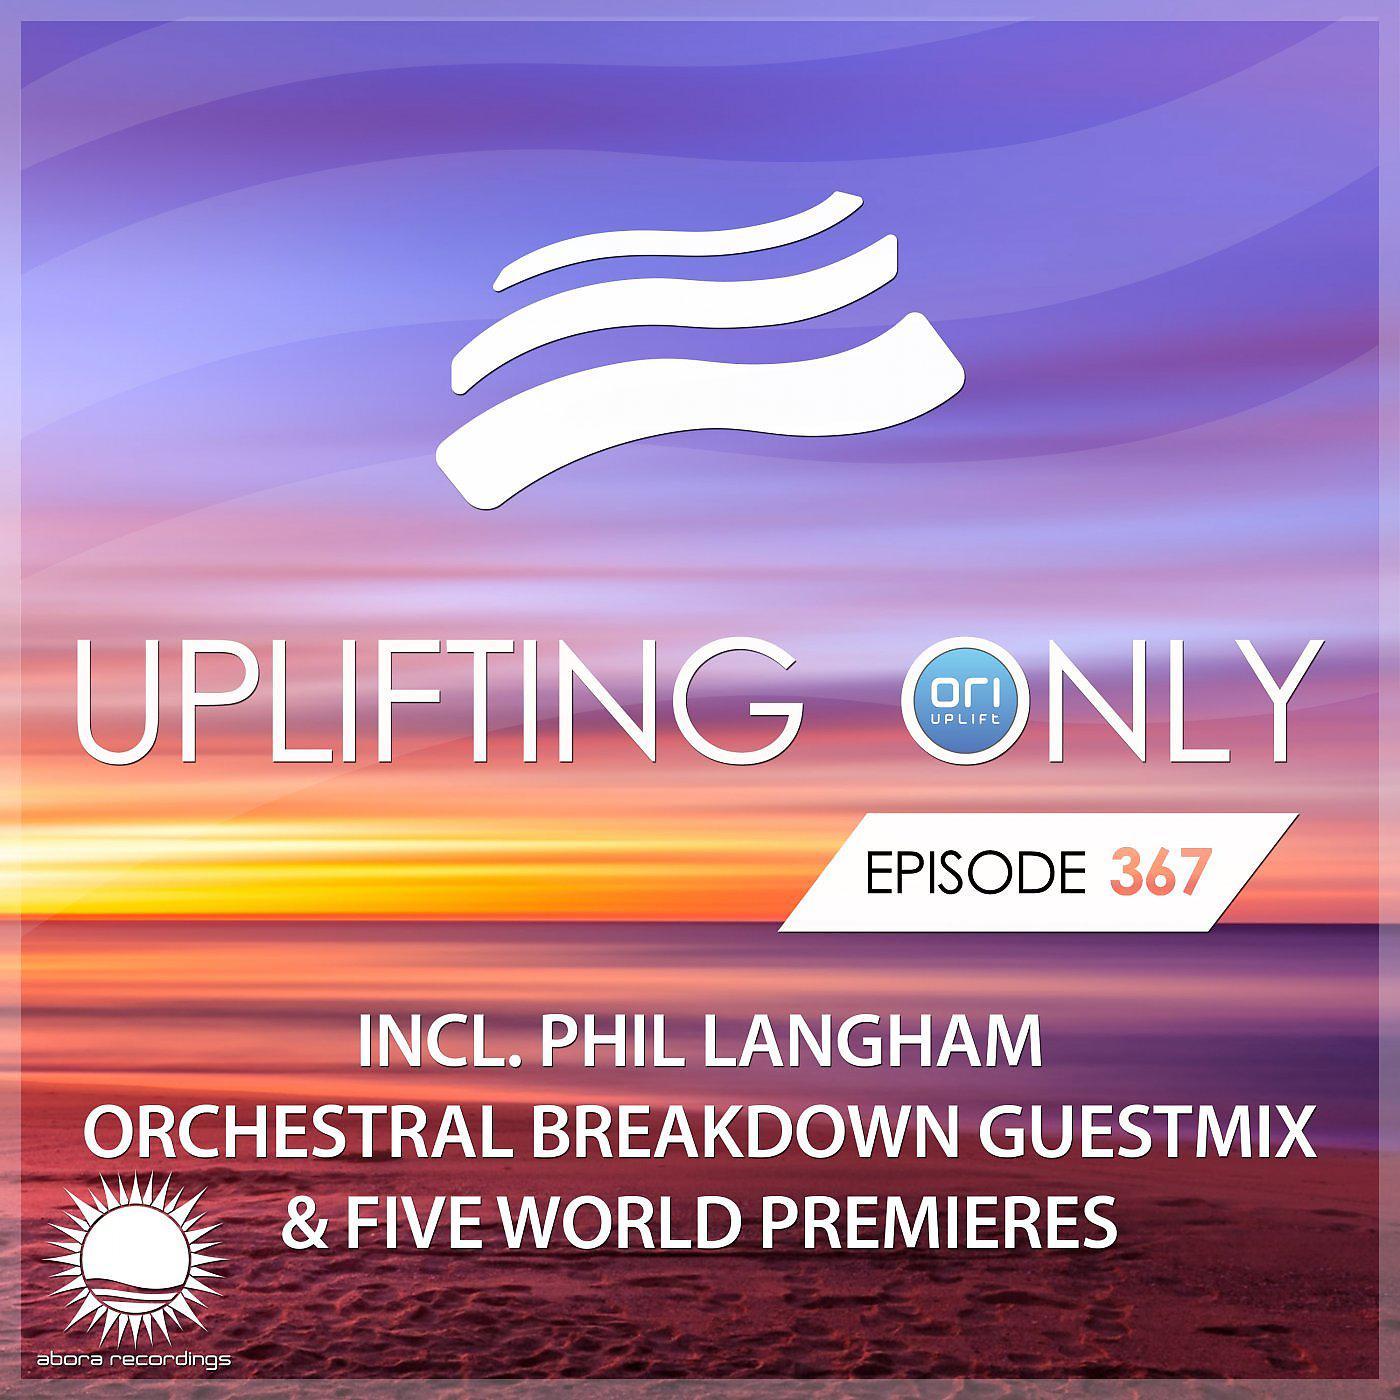 Постер альбома Uplifting Only Episode 367 (incl. Phil Langham Orchestral Breakdown Guestmix) (Feb 2020)